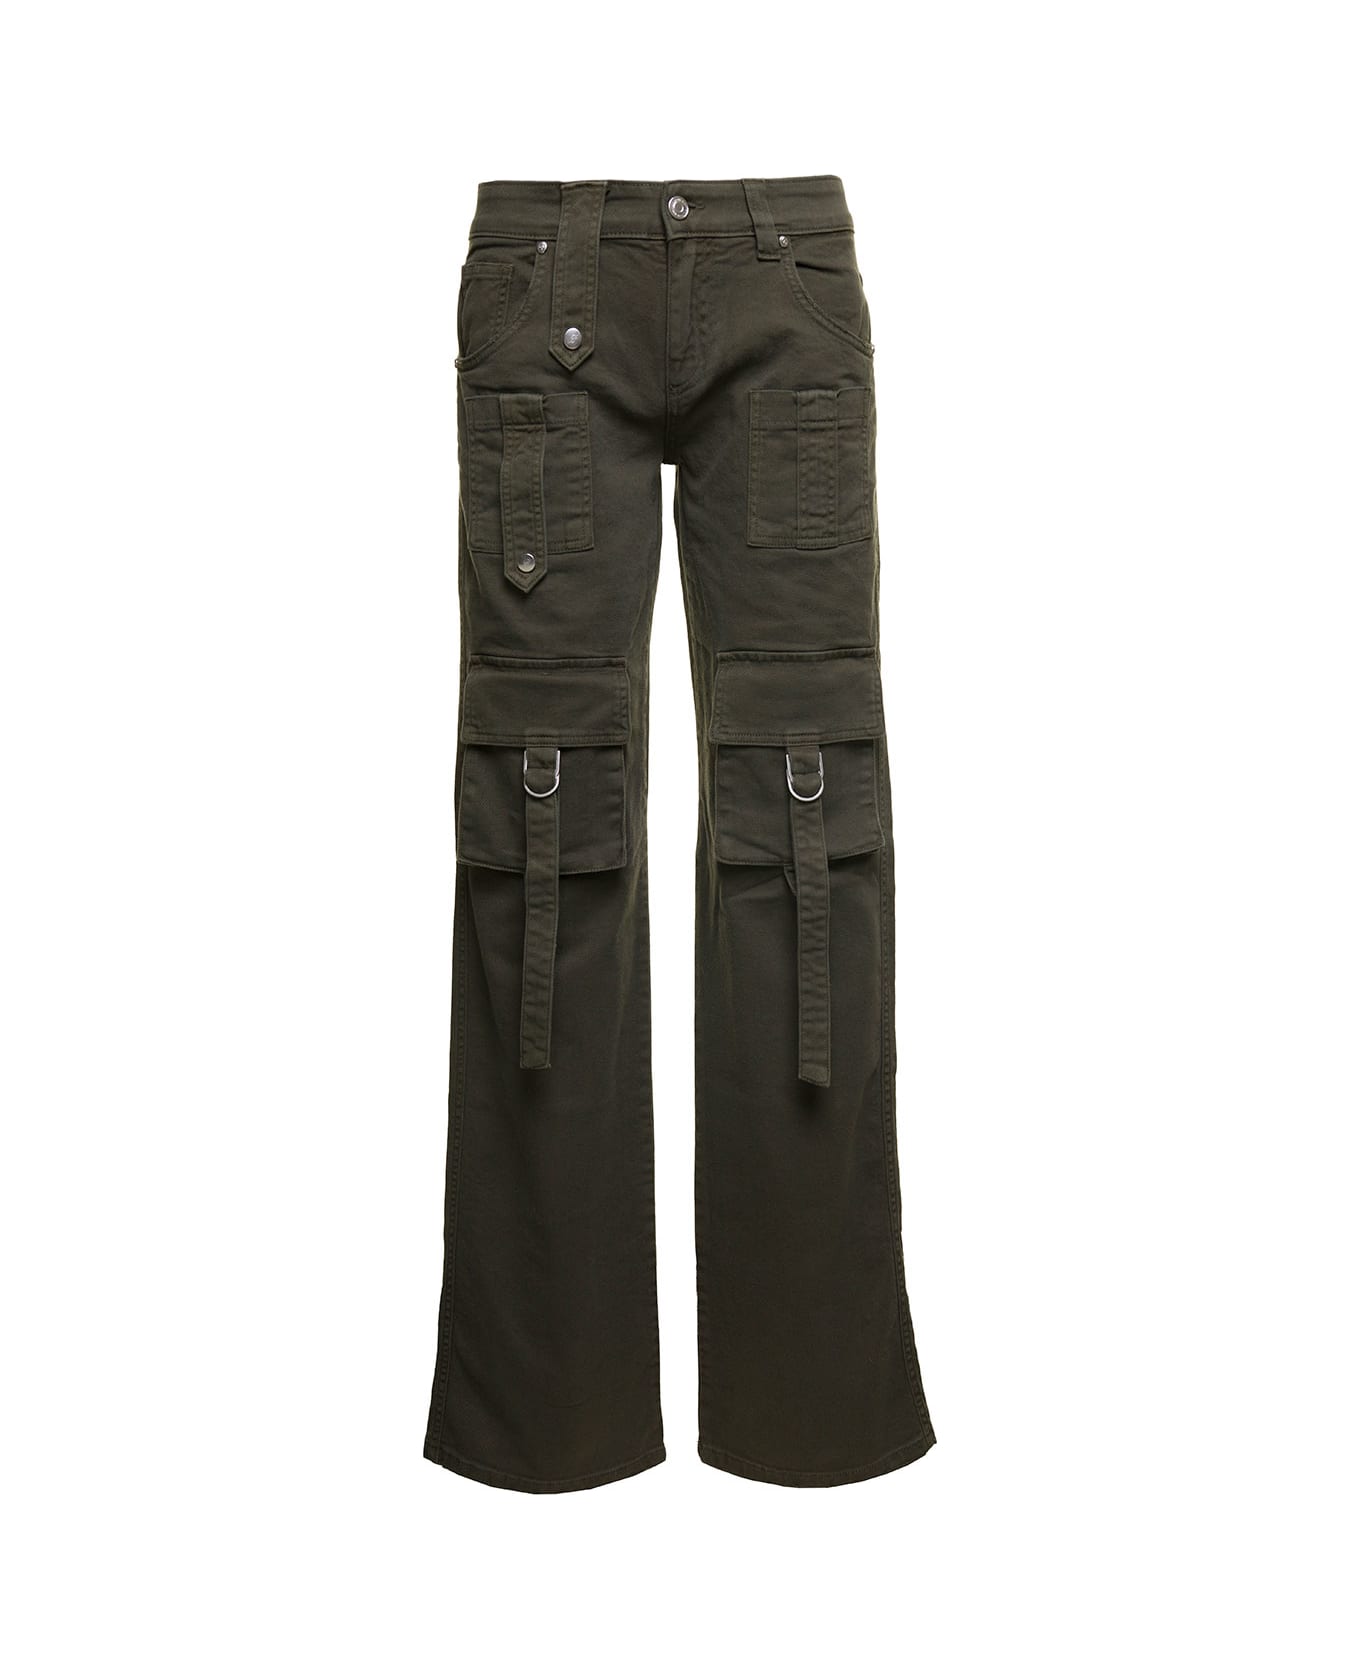 Blumarine Military Green Cargo Jeans With Buckles And Branded Button In Stretch Cotton Denim Woman - Green